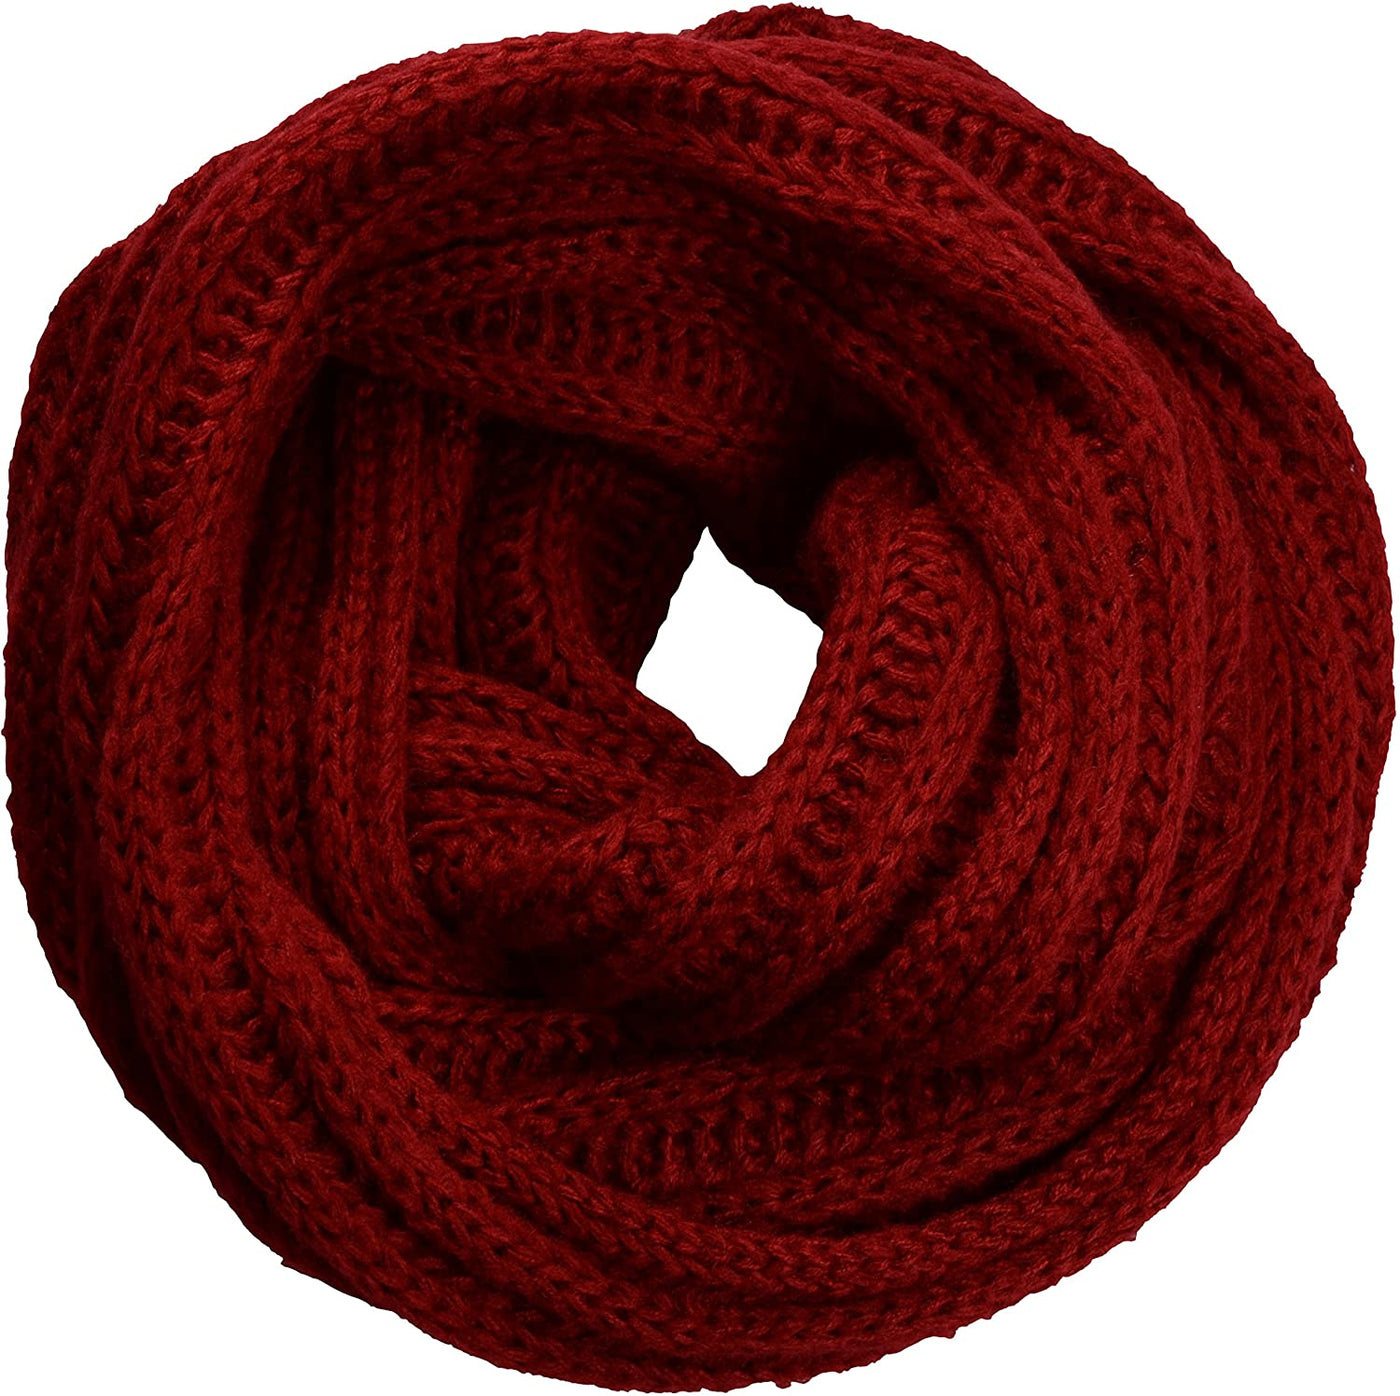 NEOSAN Women's Men Thick Winter Knitted Infinity Circle Loop Scarf